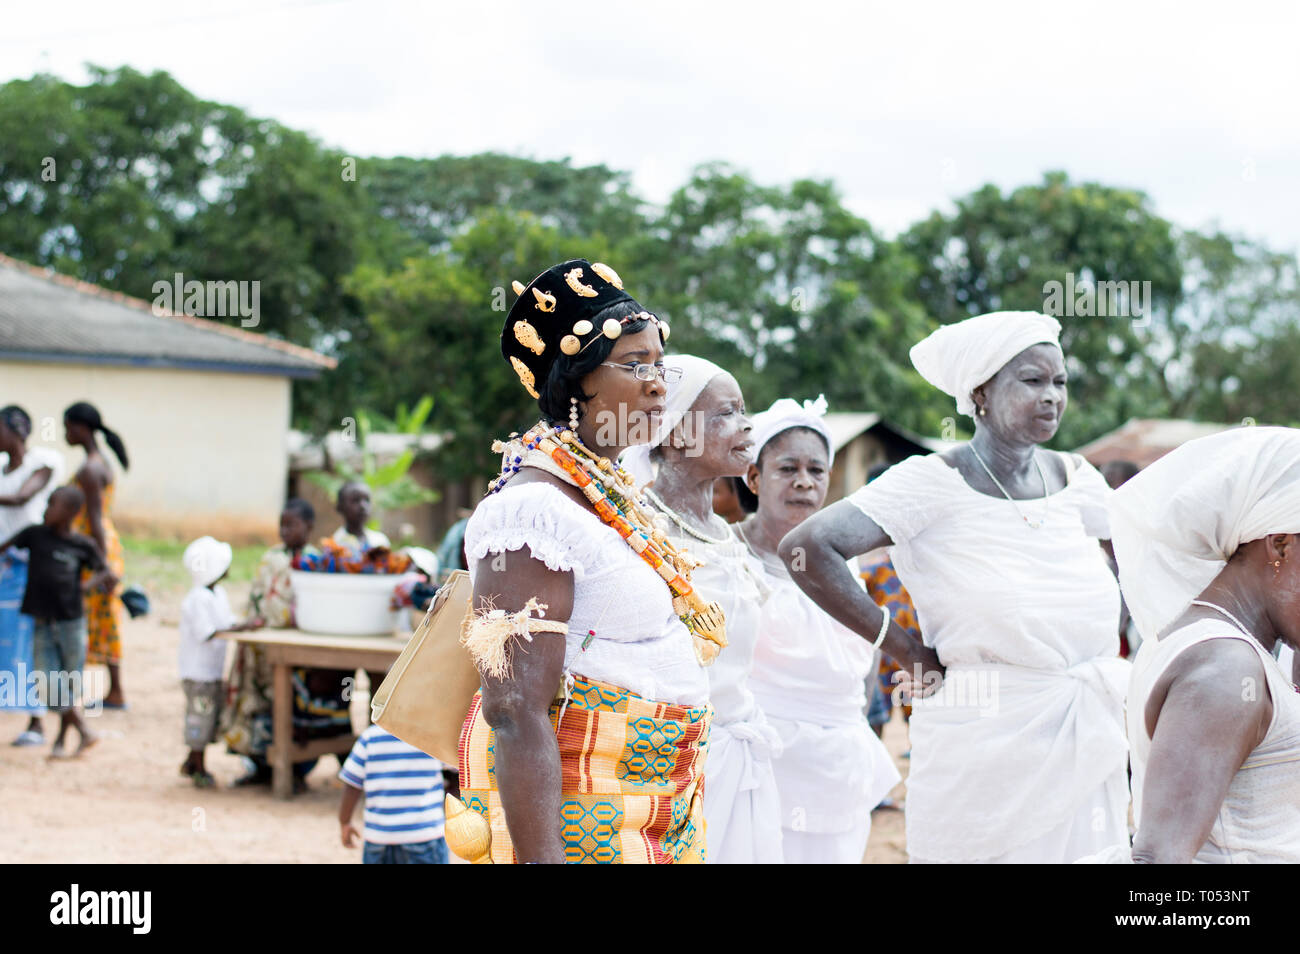 adzopé, ivory coast-august 31, 2016: young woman dressed in traditional dress, gold hat glasses neck collars standing near other women in white and lo Stock Photo